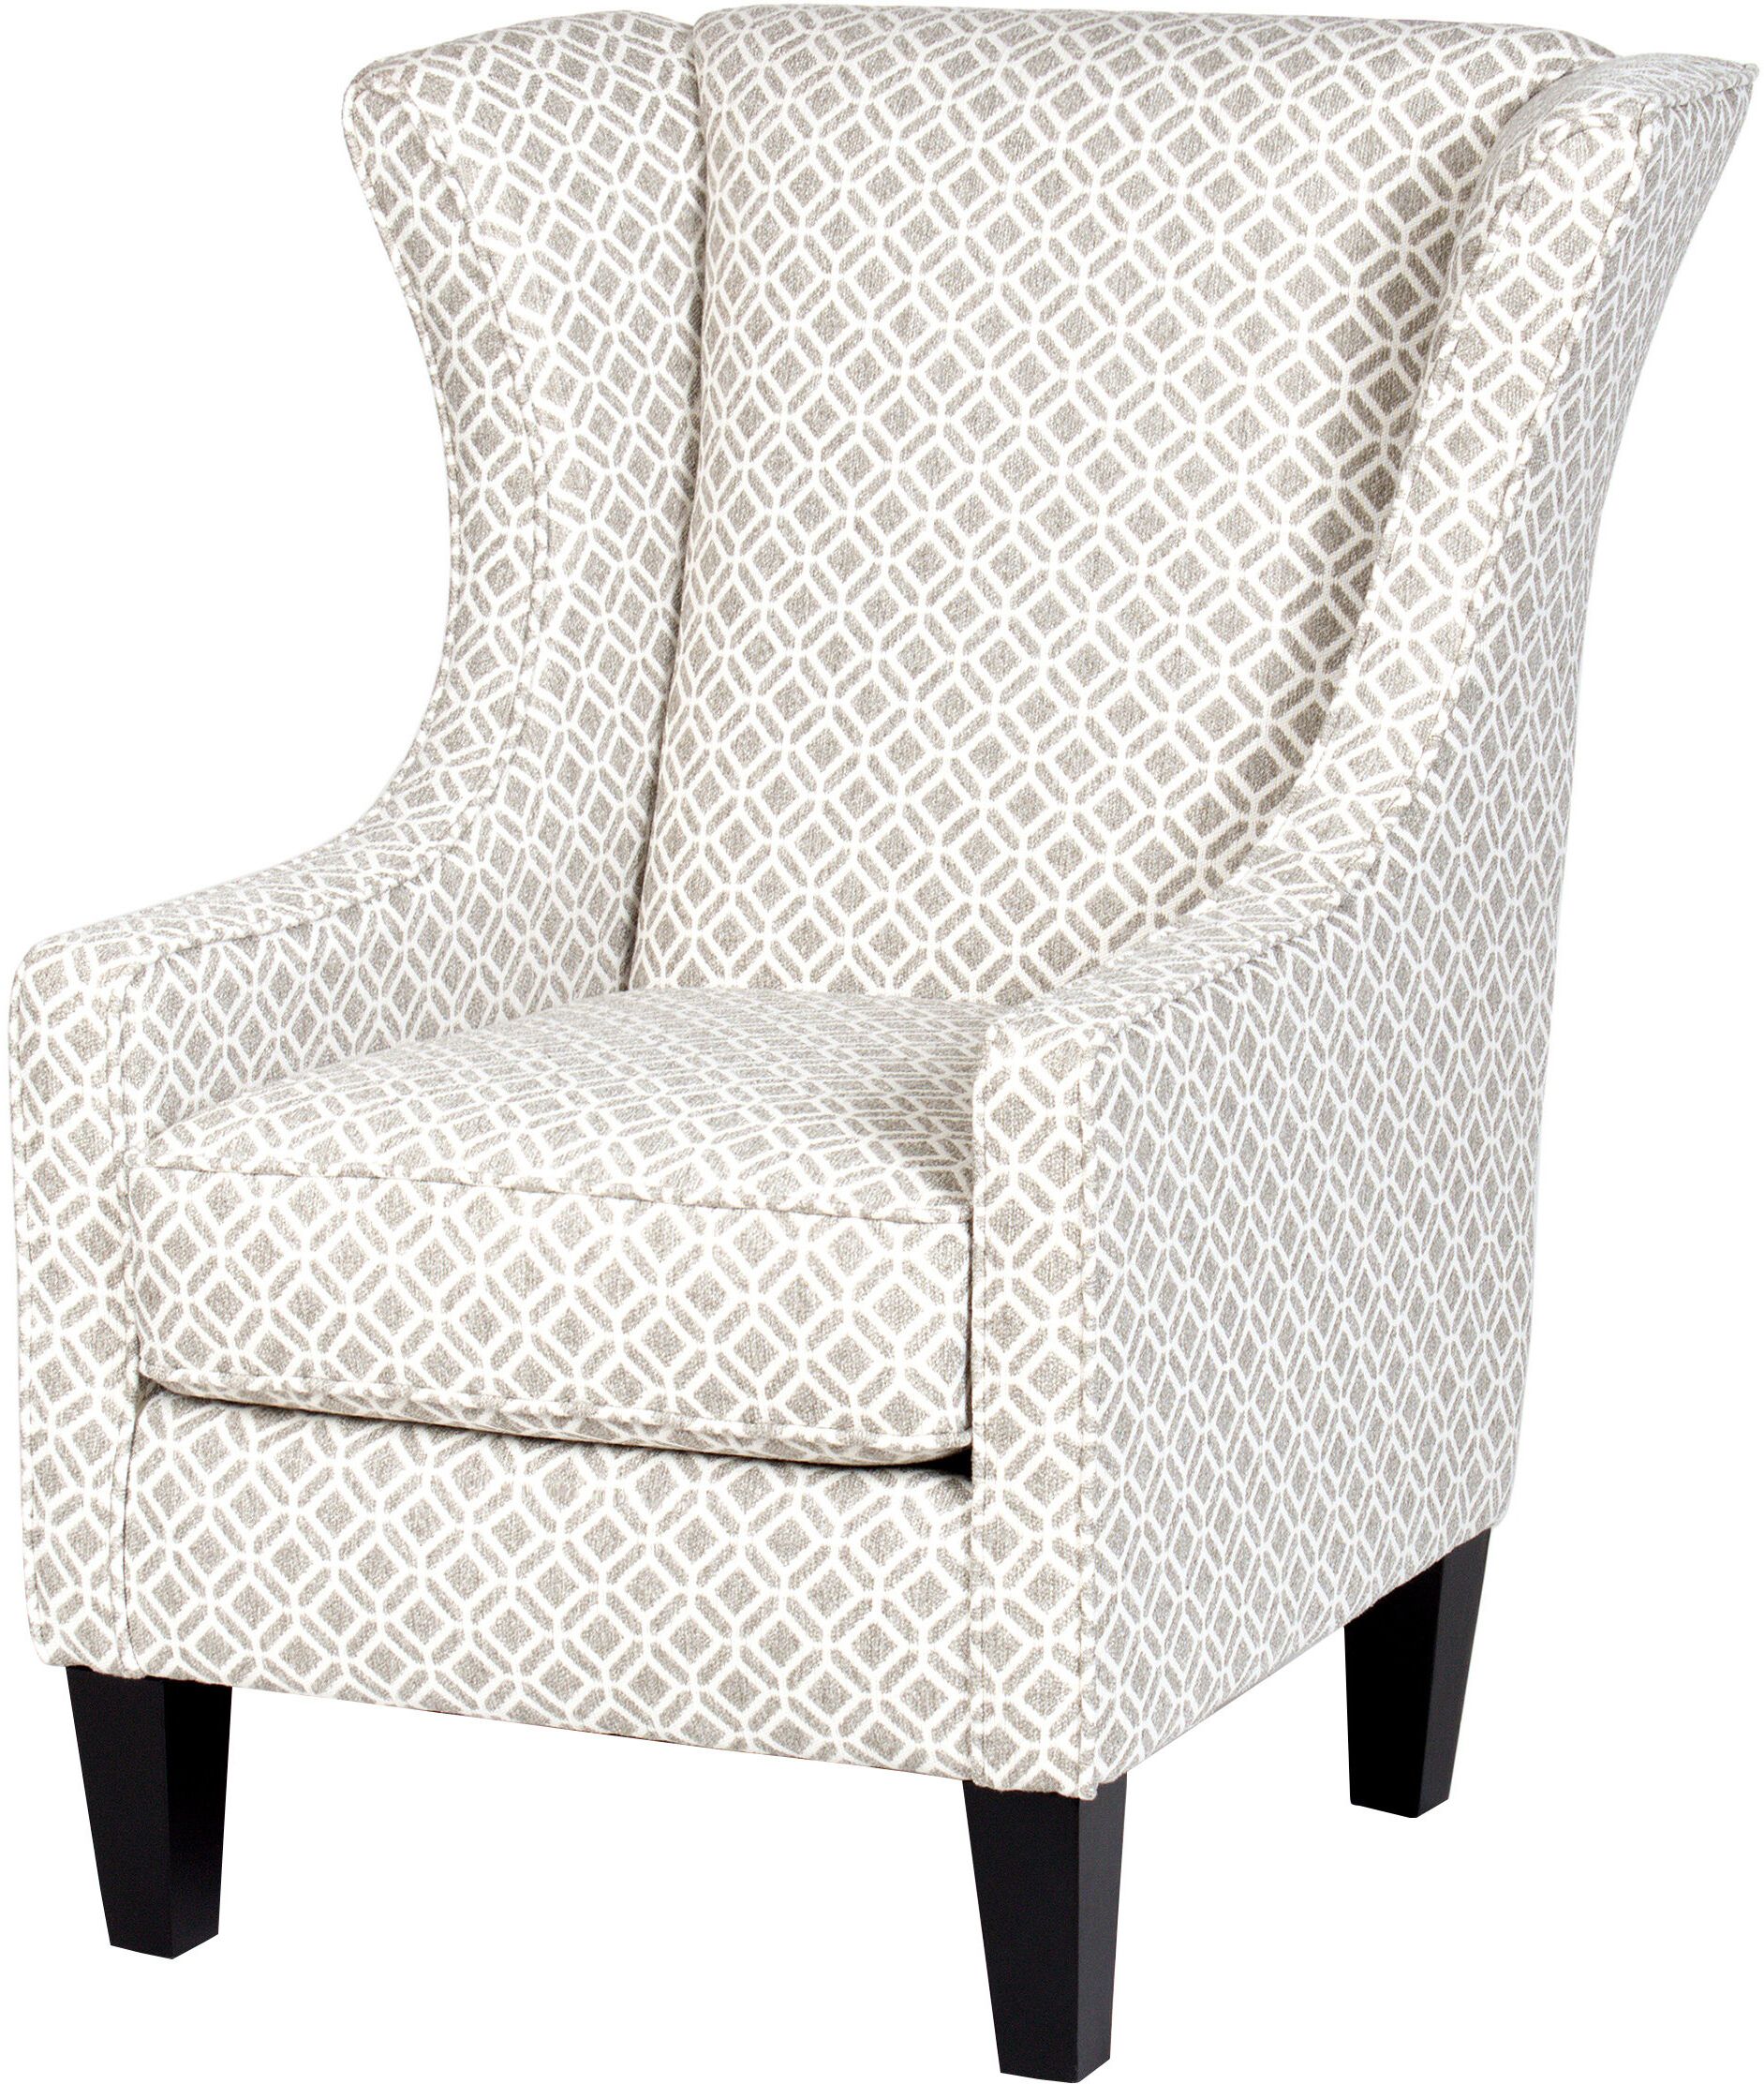 Altamahaw Swoop Side Chairs Regarding Preferred Wingback Chair (View 1 of 20)